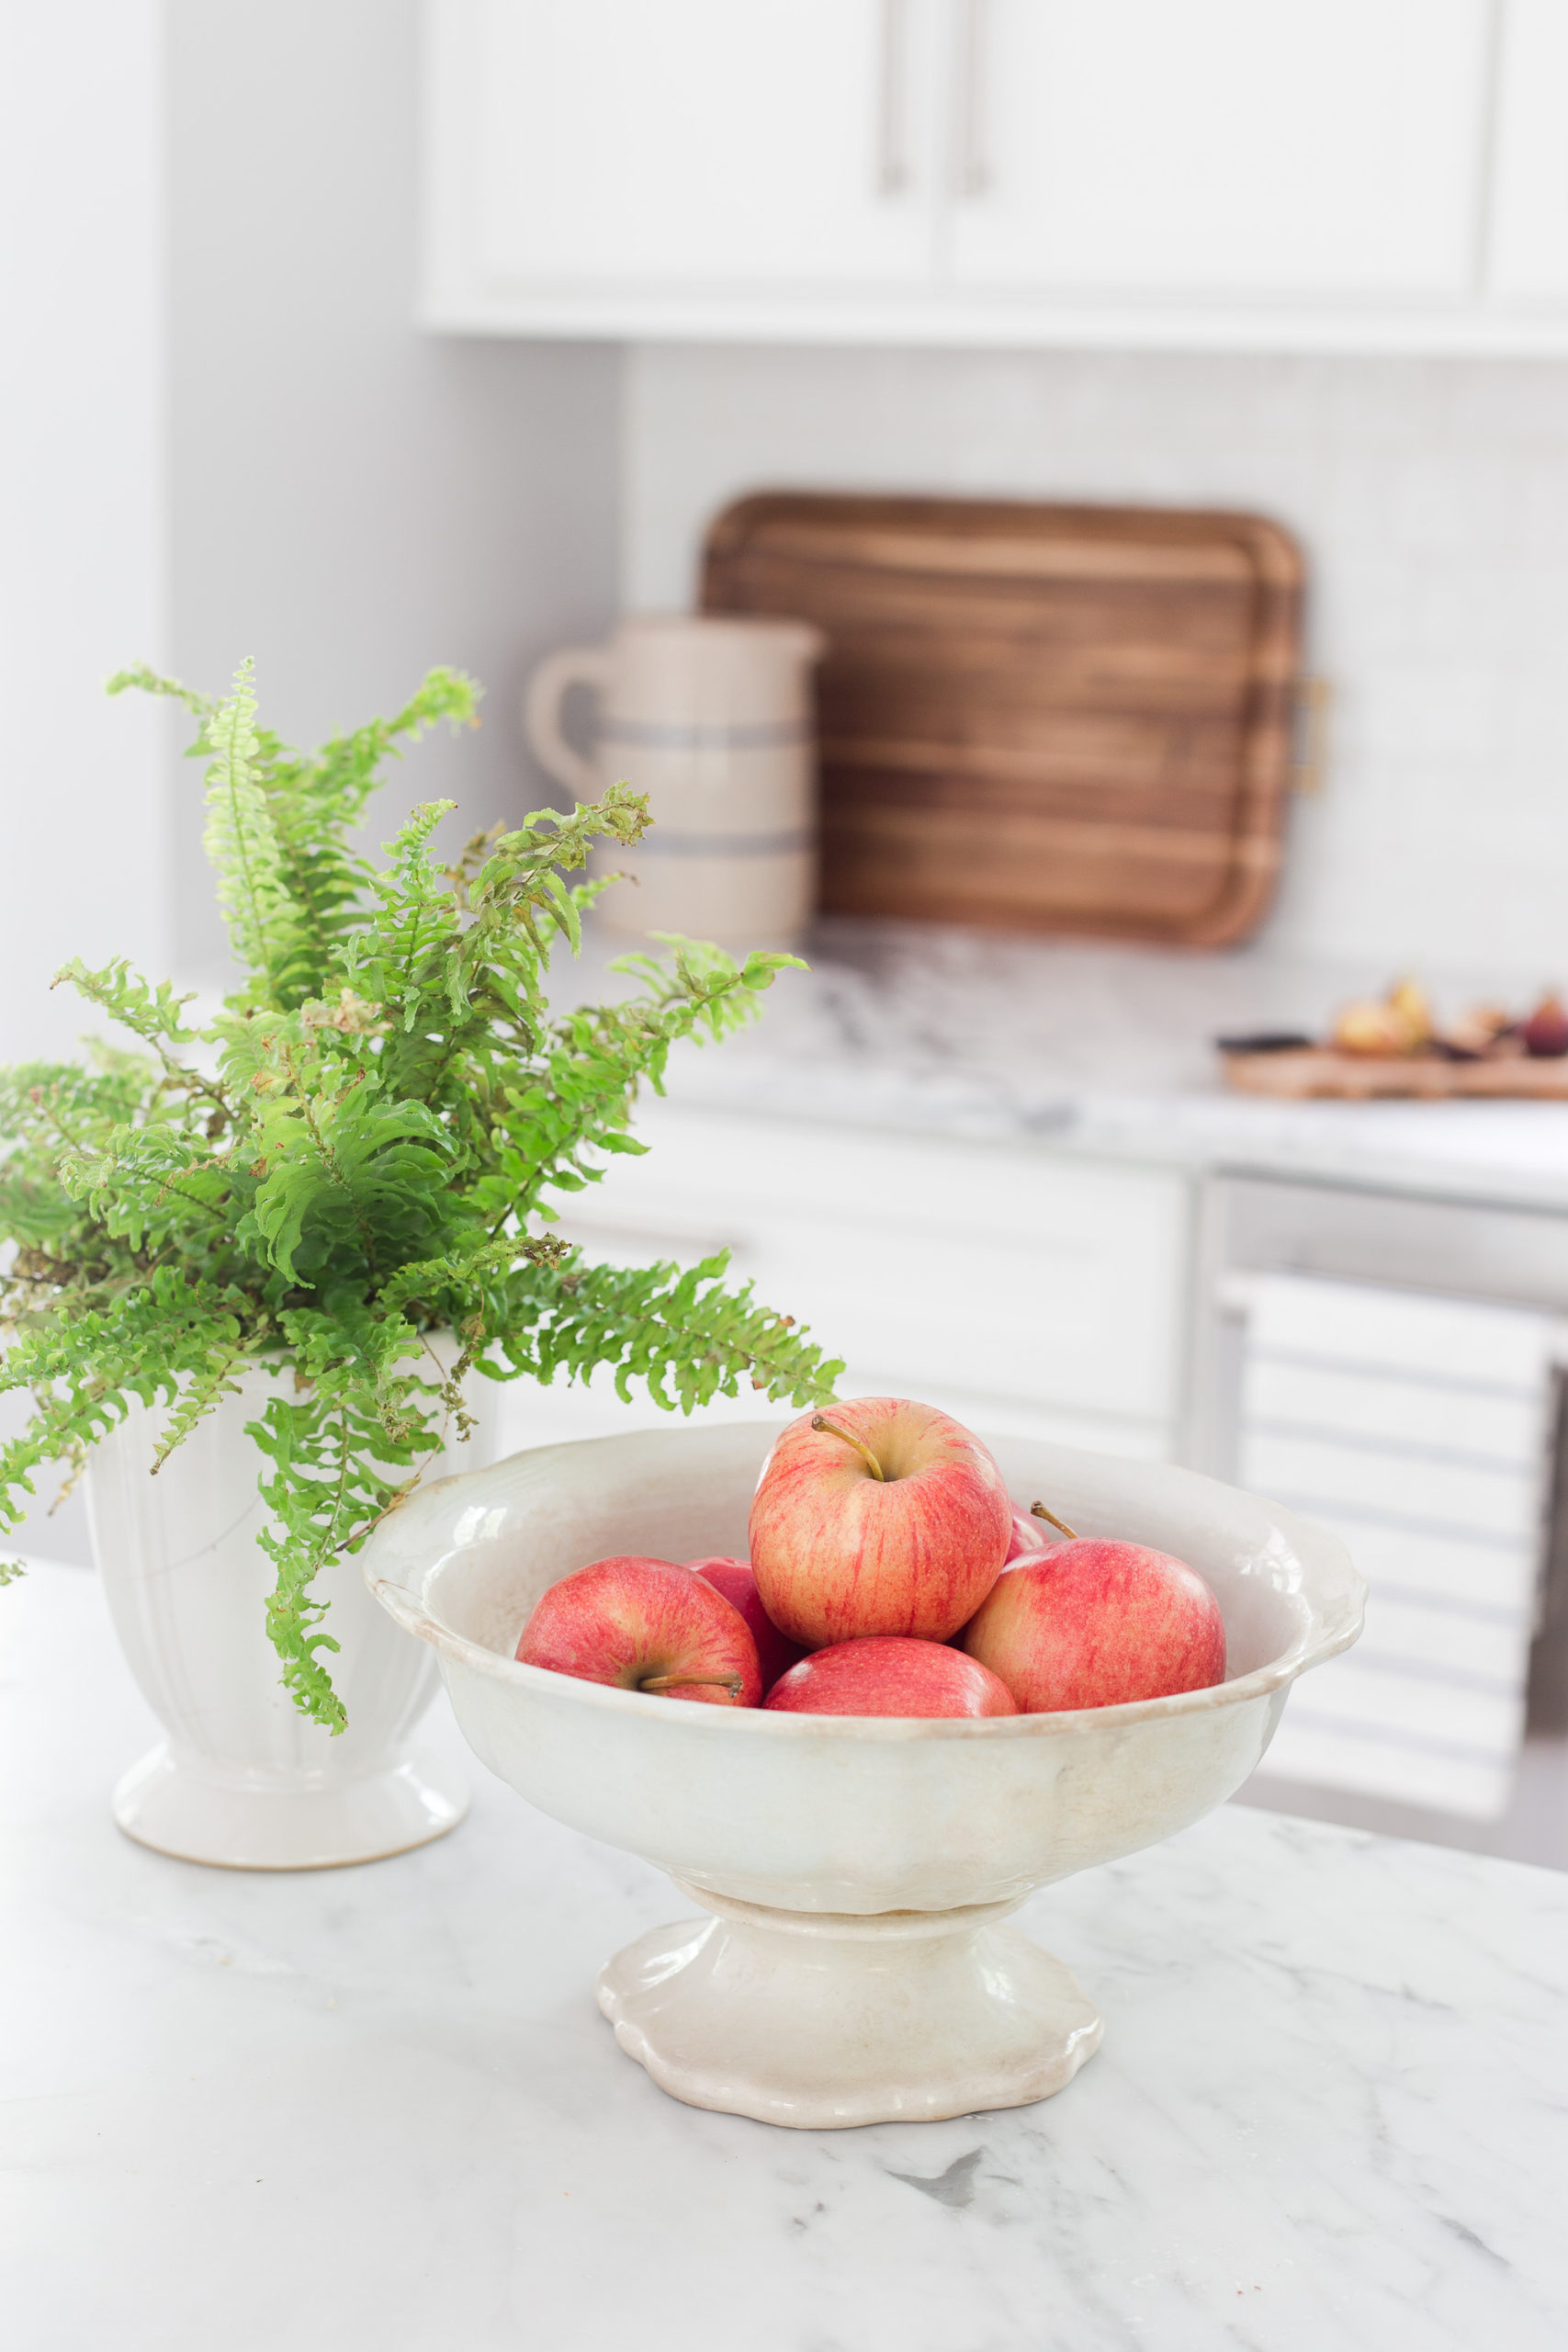 bowl of apples with a fern sitting next to it sitting on a marble kitchen countertop